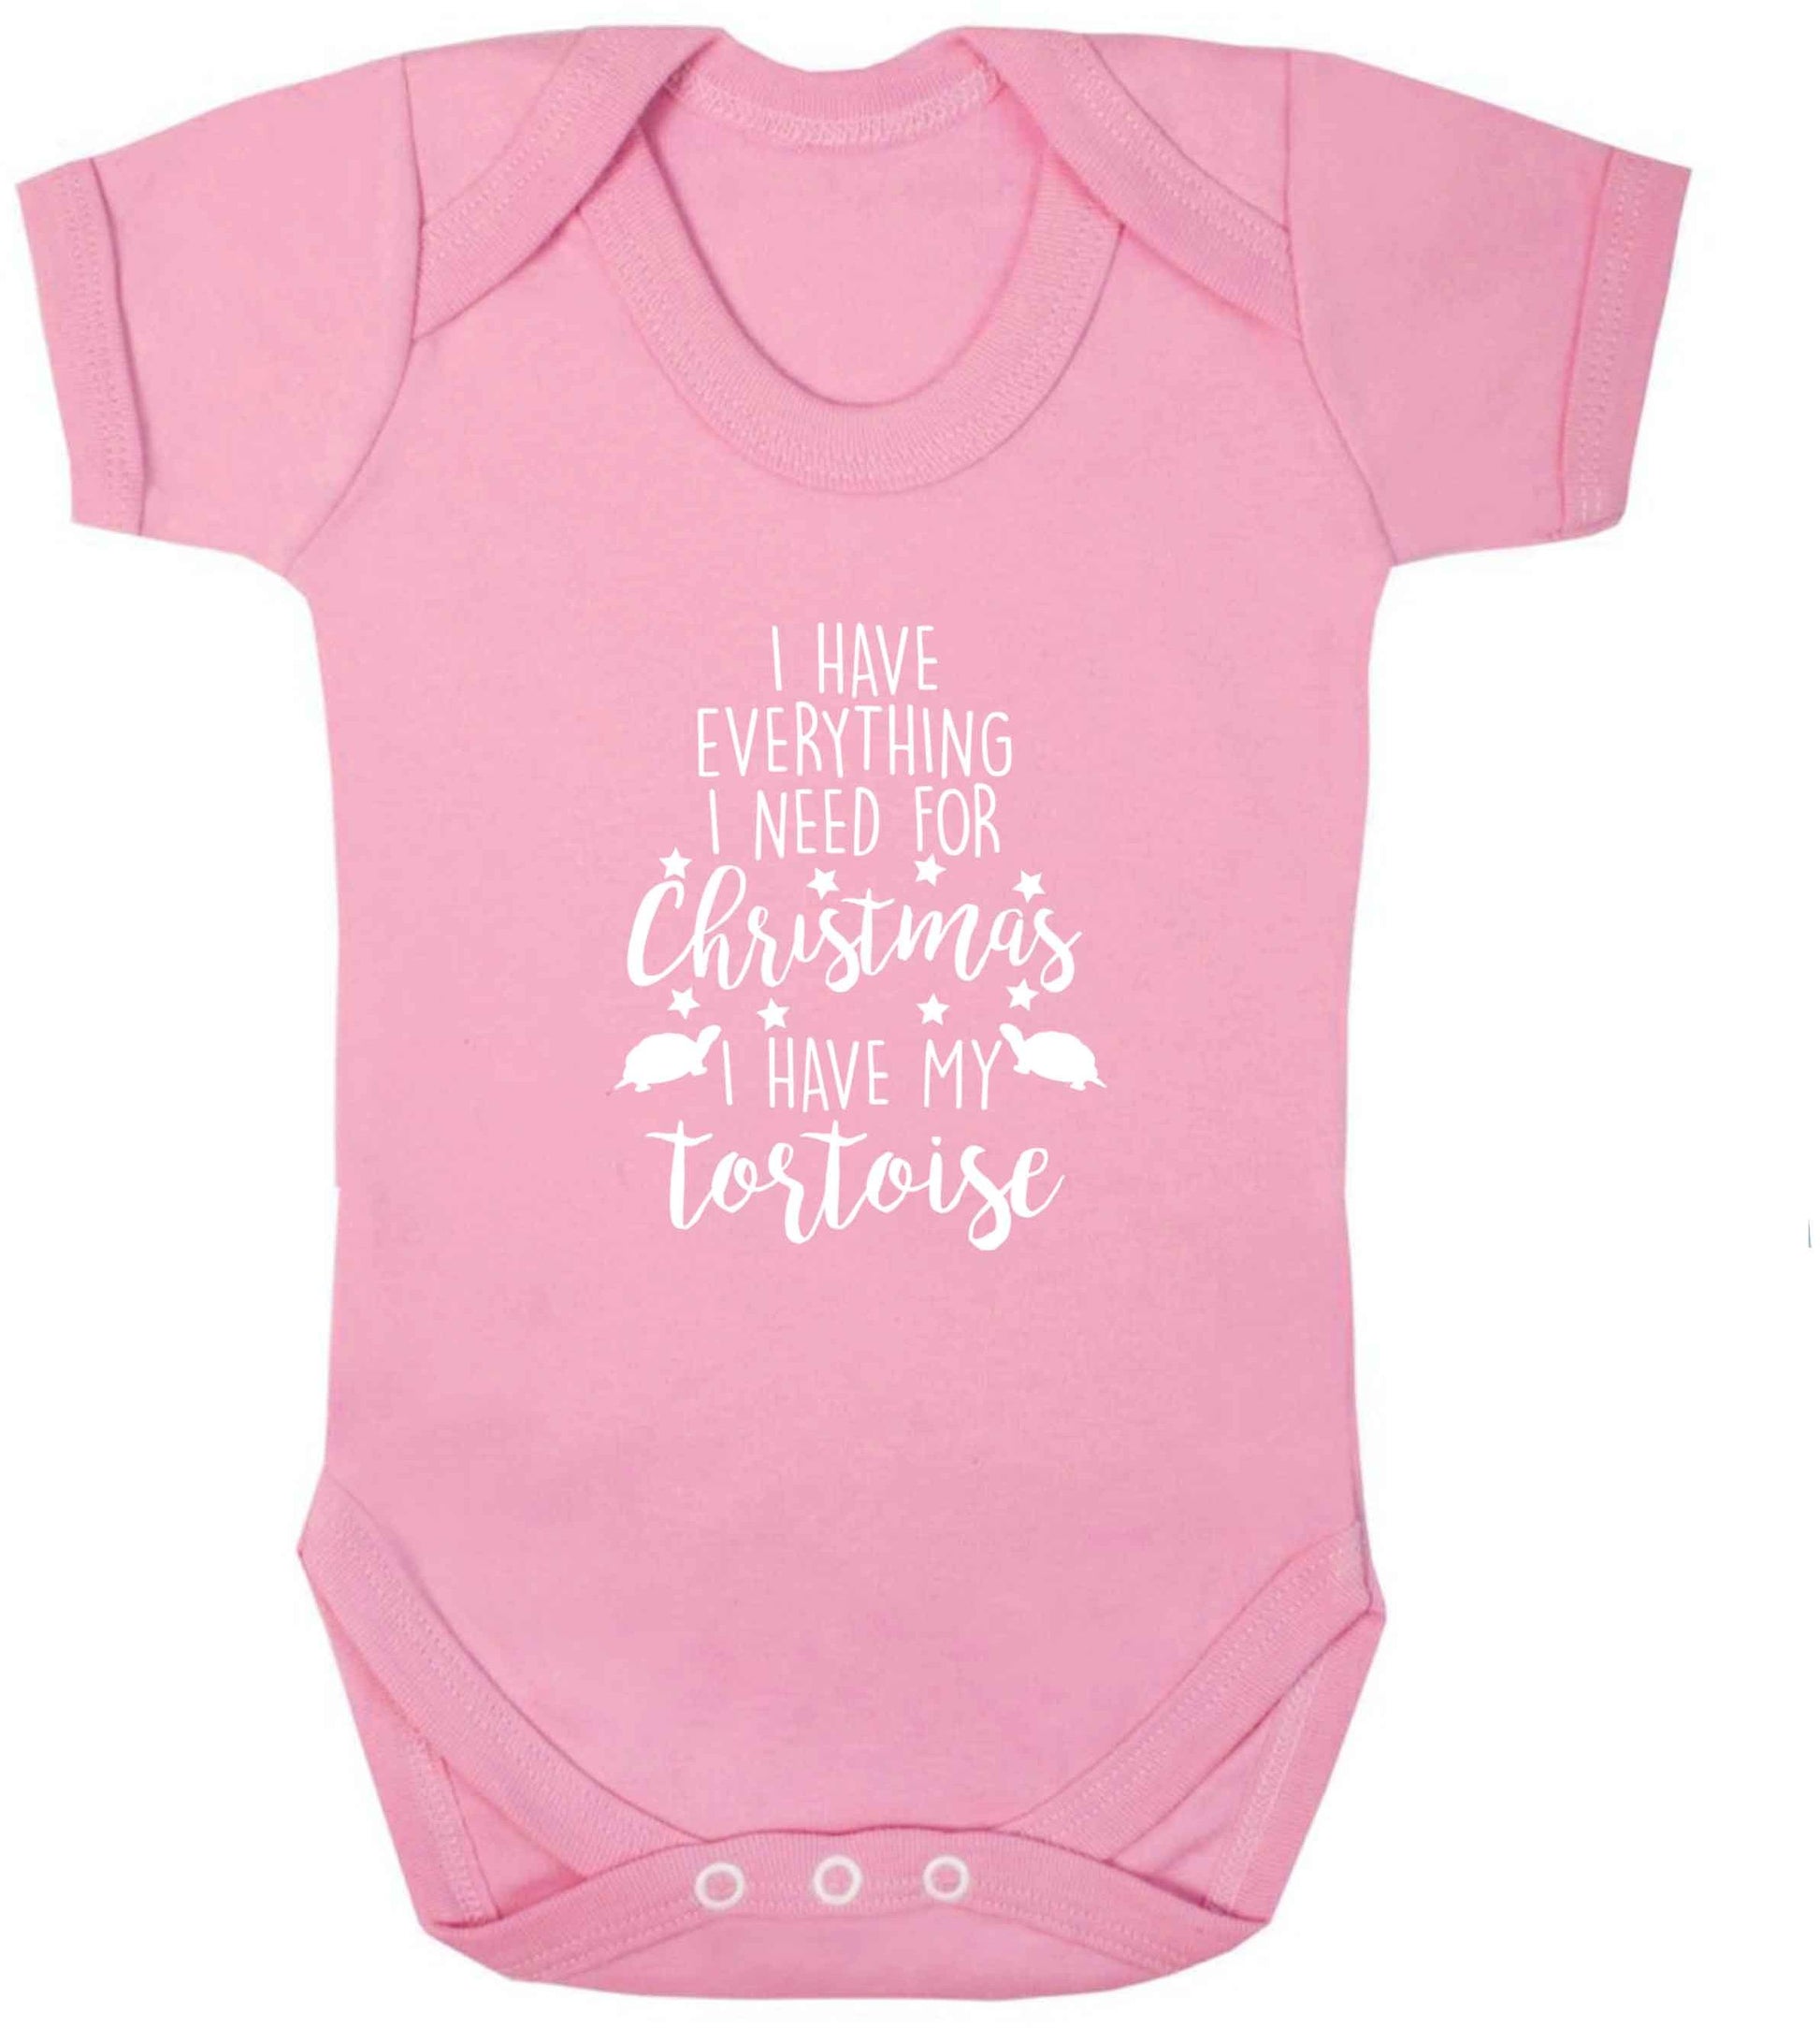 I have everything I need for Christmas I have my tortoise baby vest pale pink 18-24 months